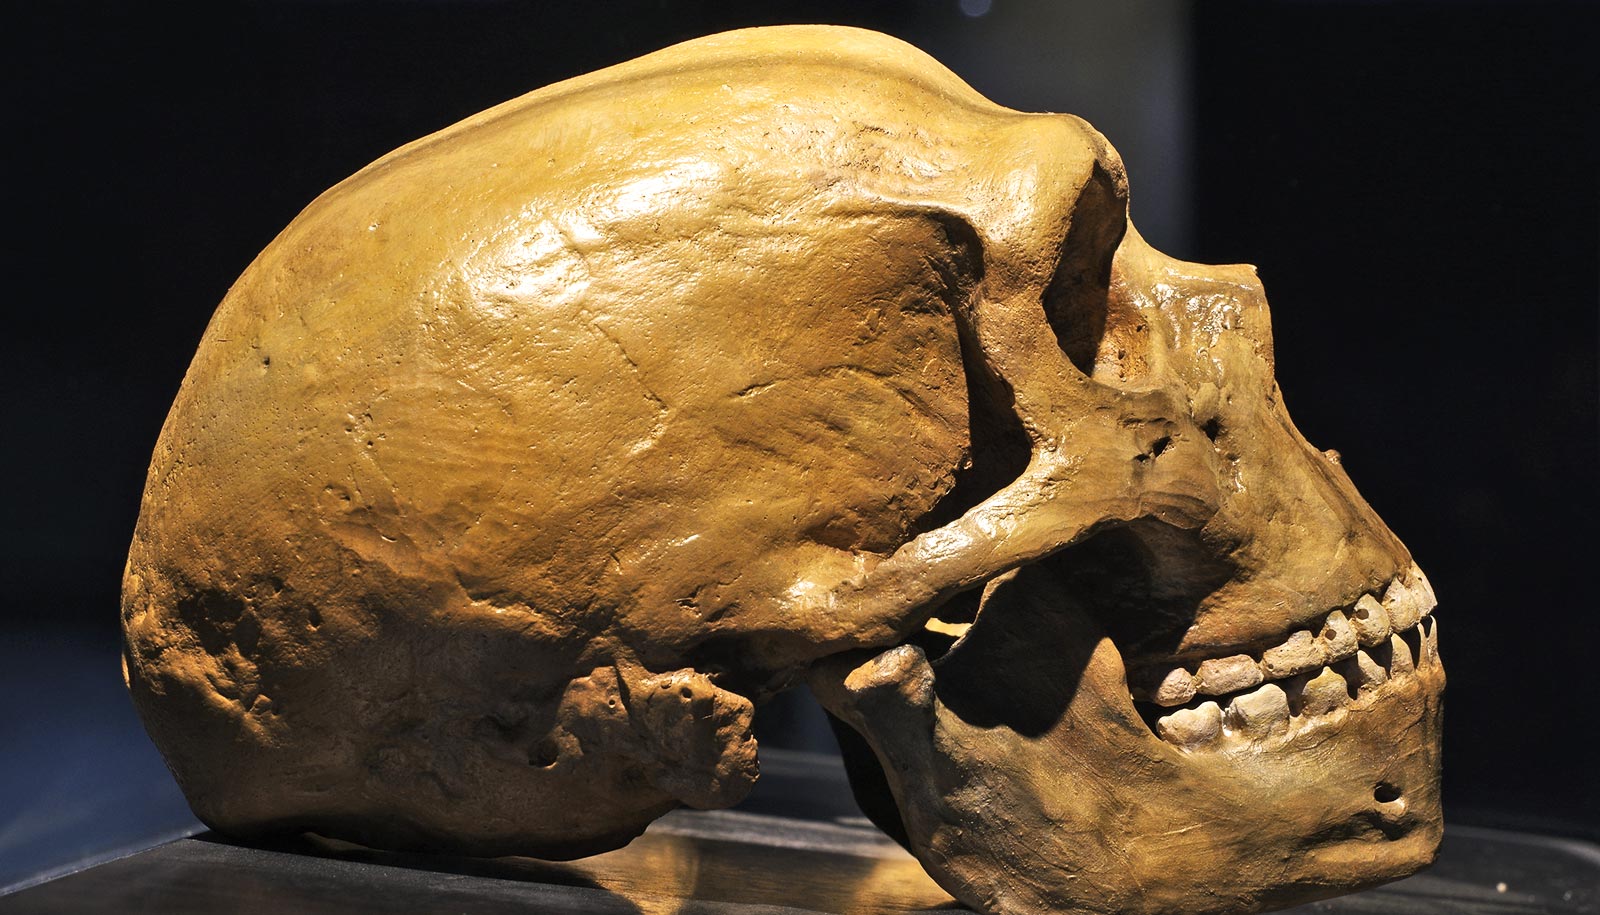 Deaf, injured Neandertal survived with help from friends - Futurity